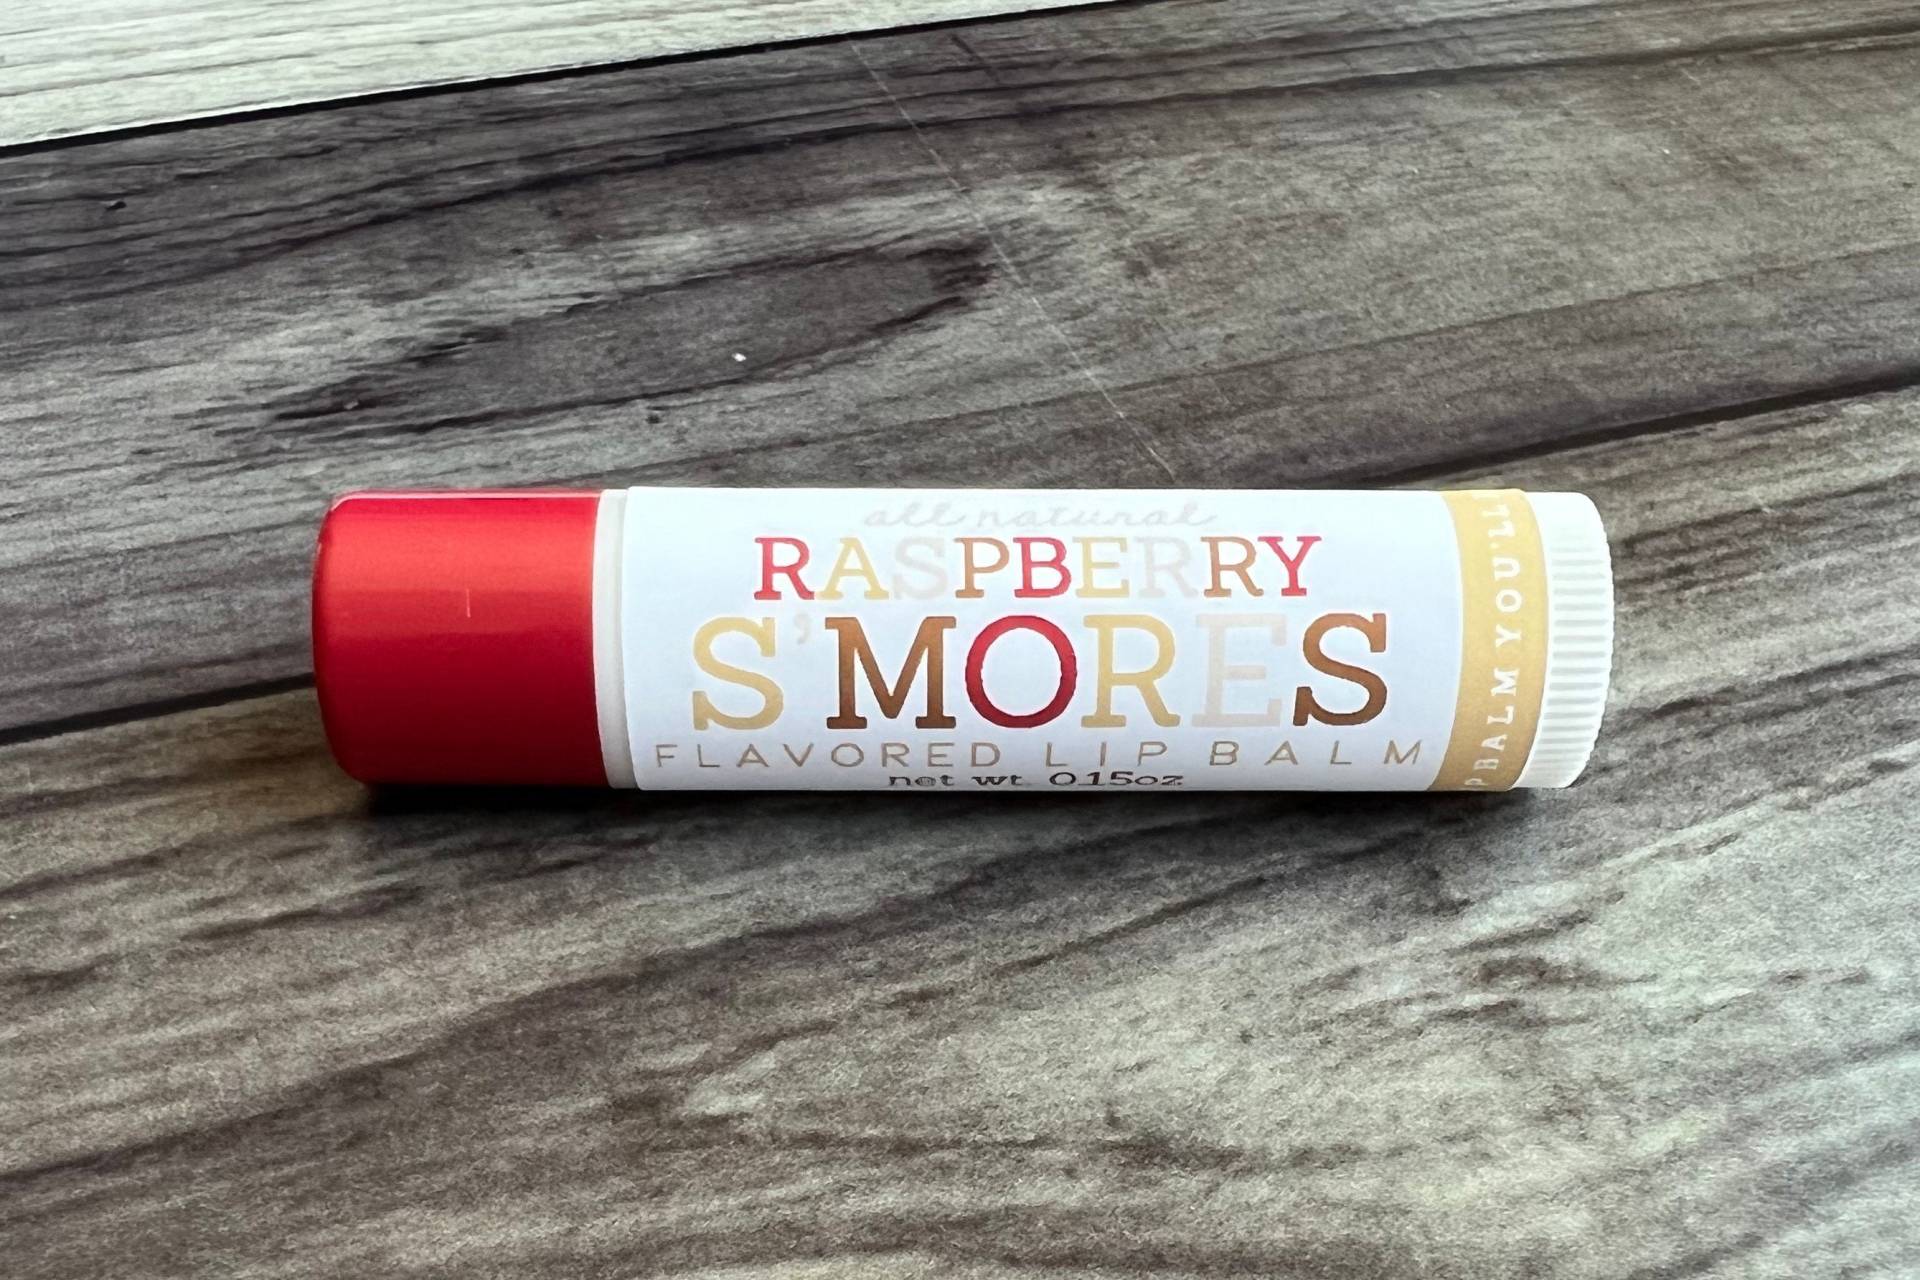 Himbeer S'mores Lippenbalsam - All Natural Handgemacht von SweetLipsLBCo